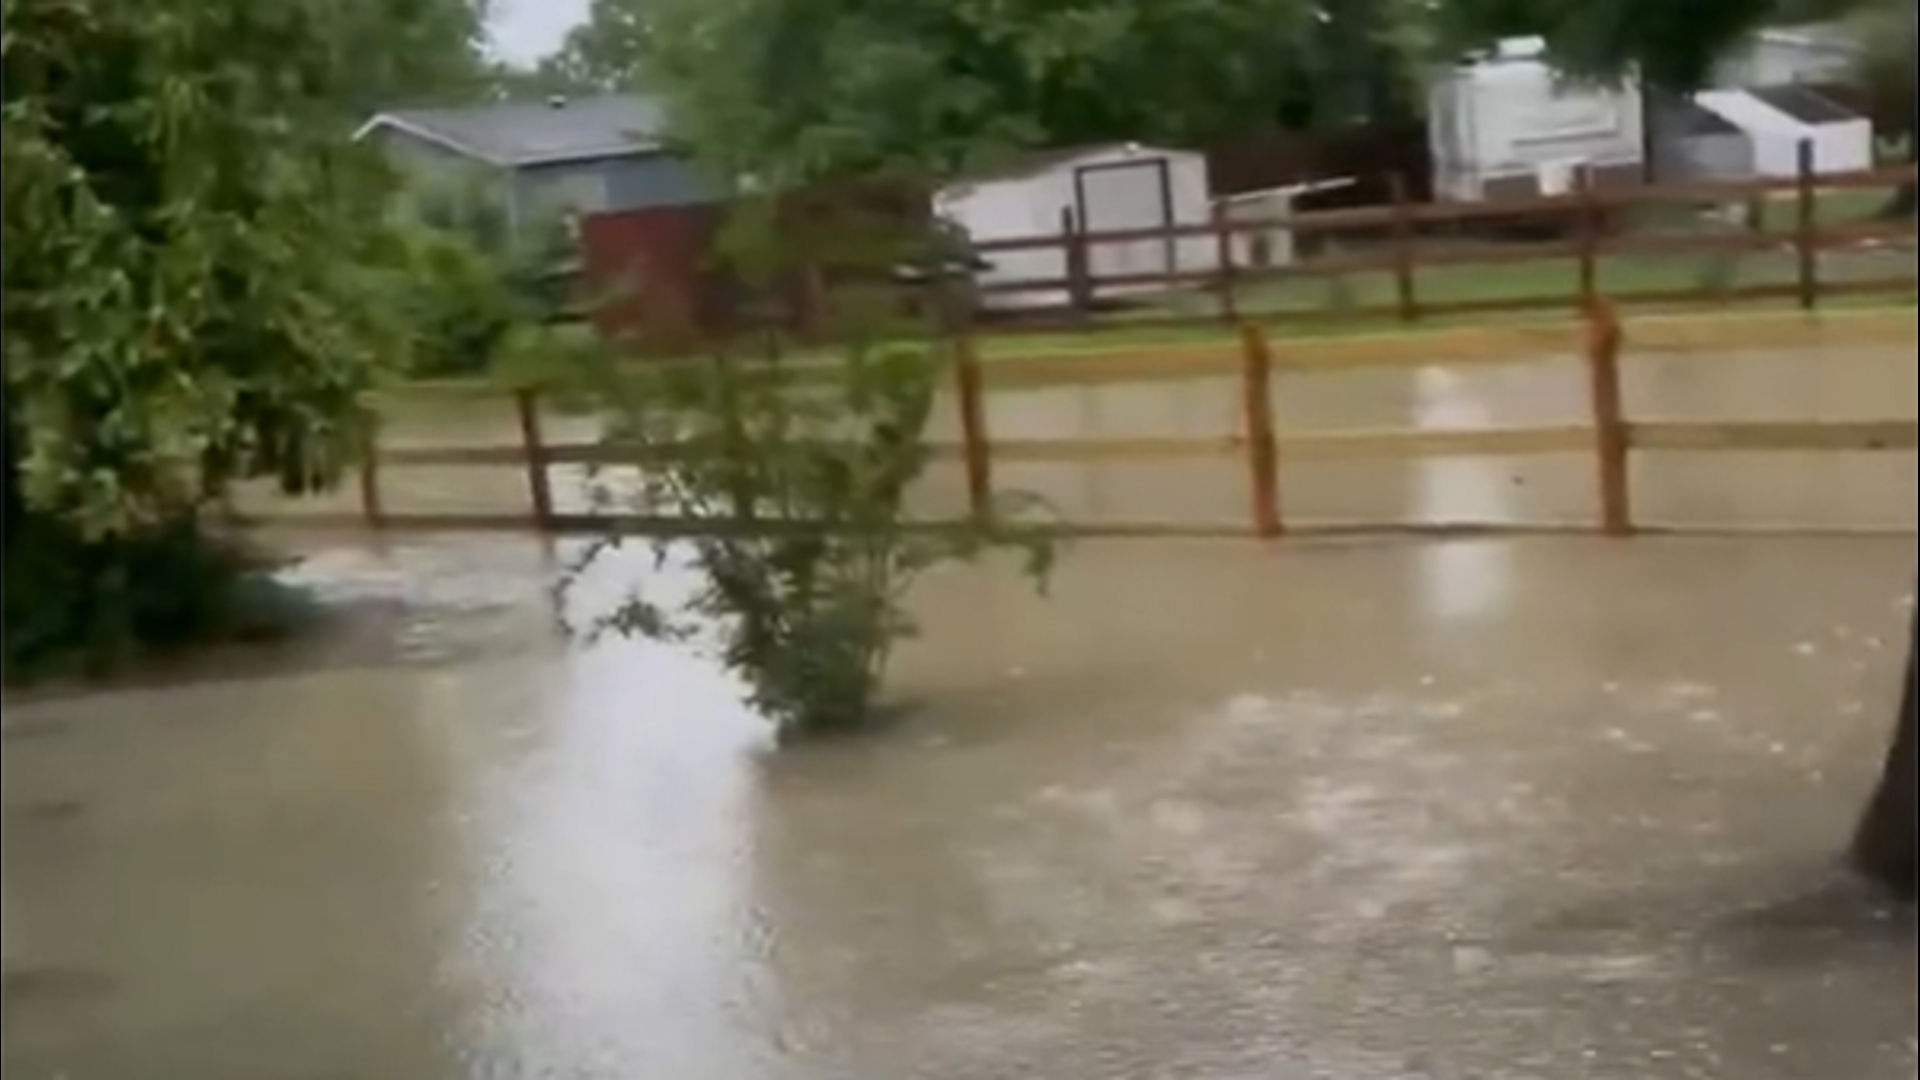 Salas shared this video with us from flooding in Cleveland Thursday.